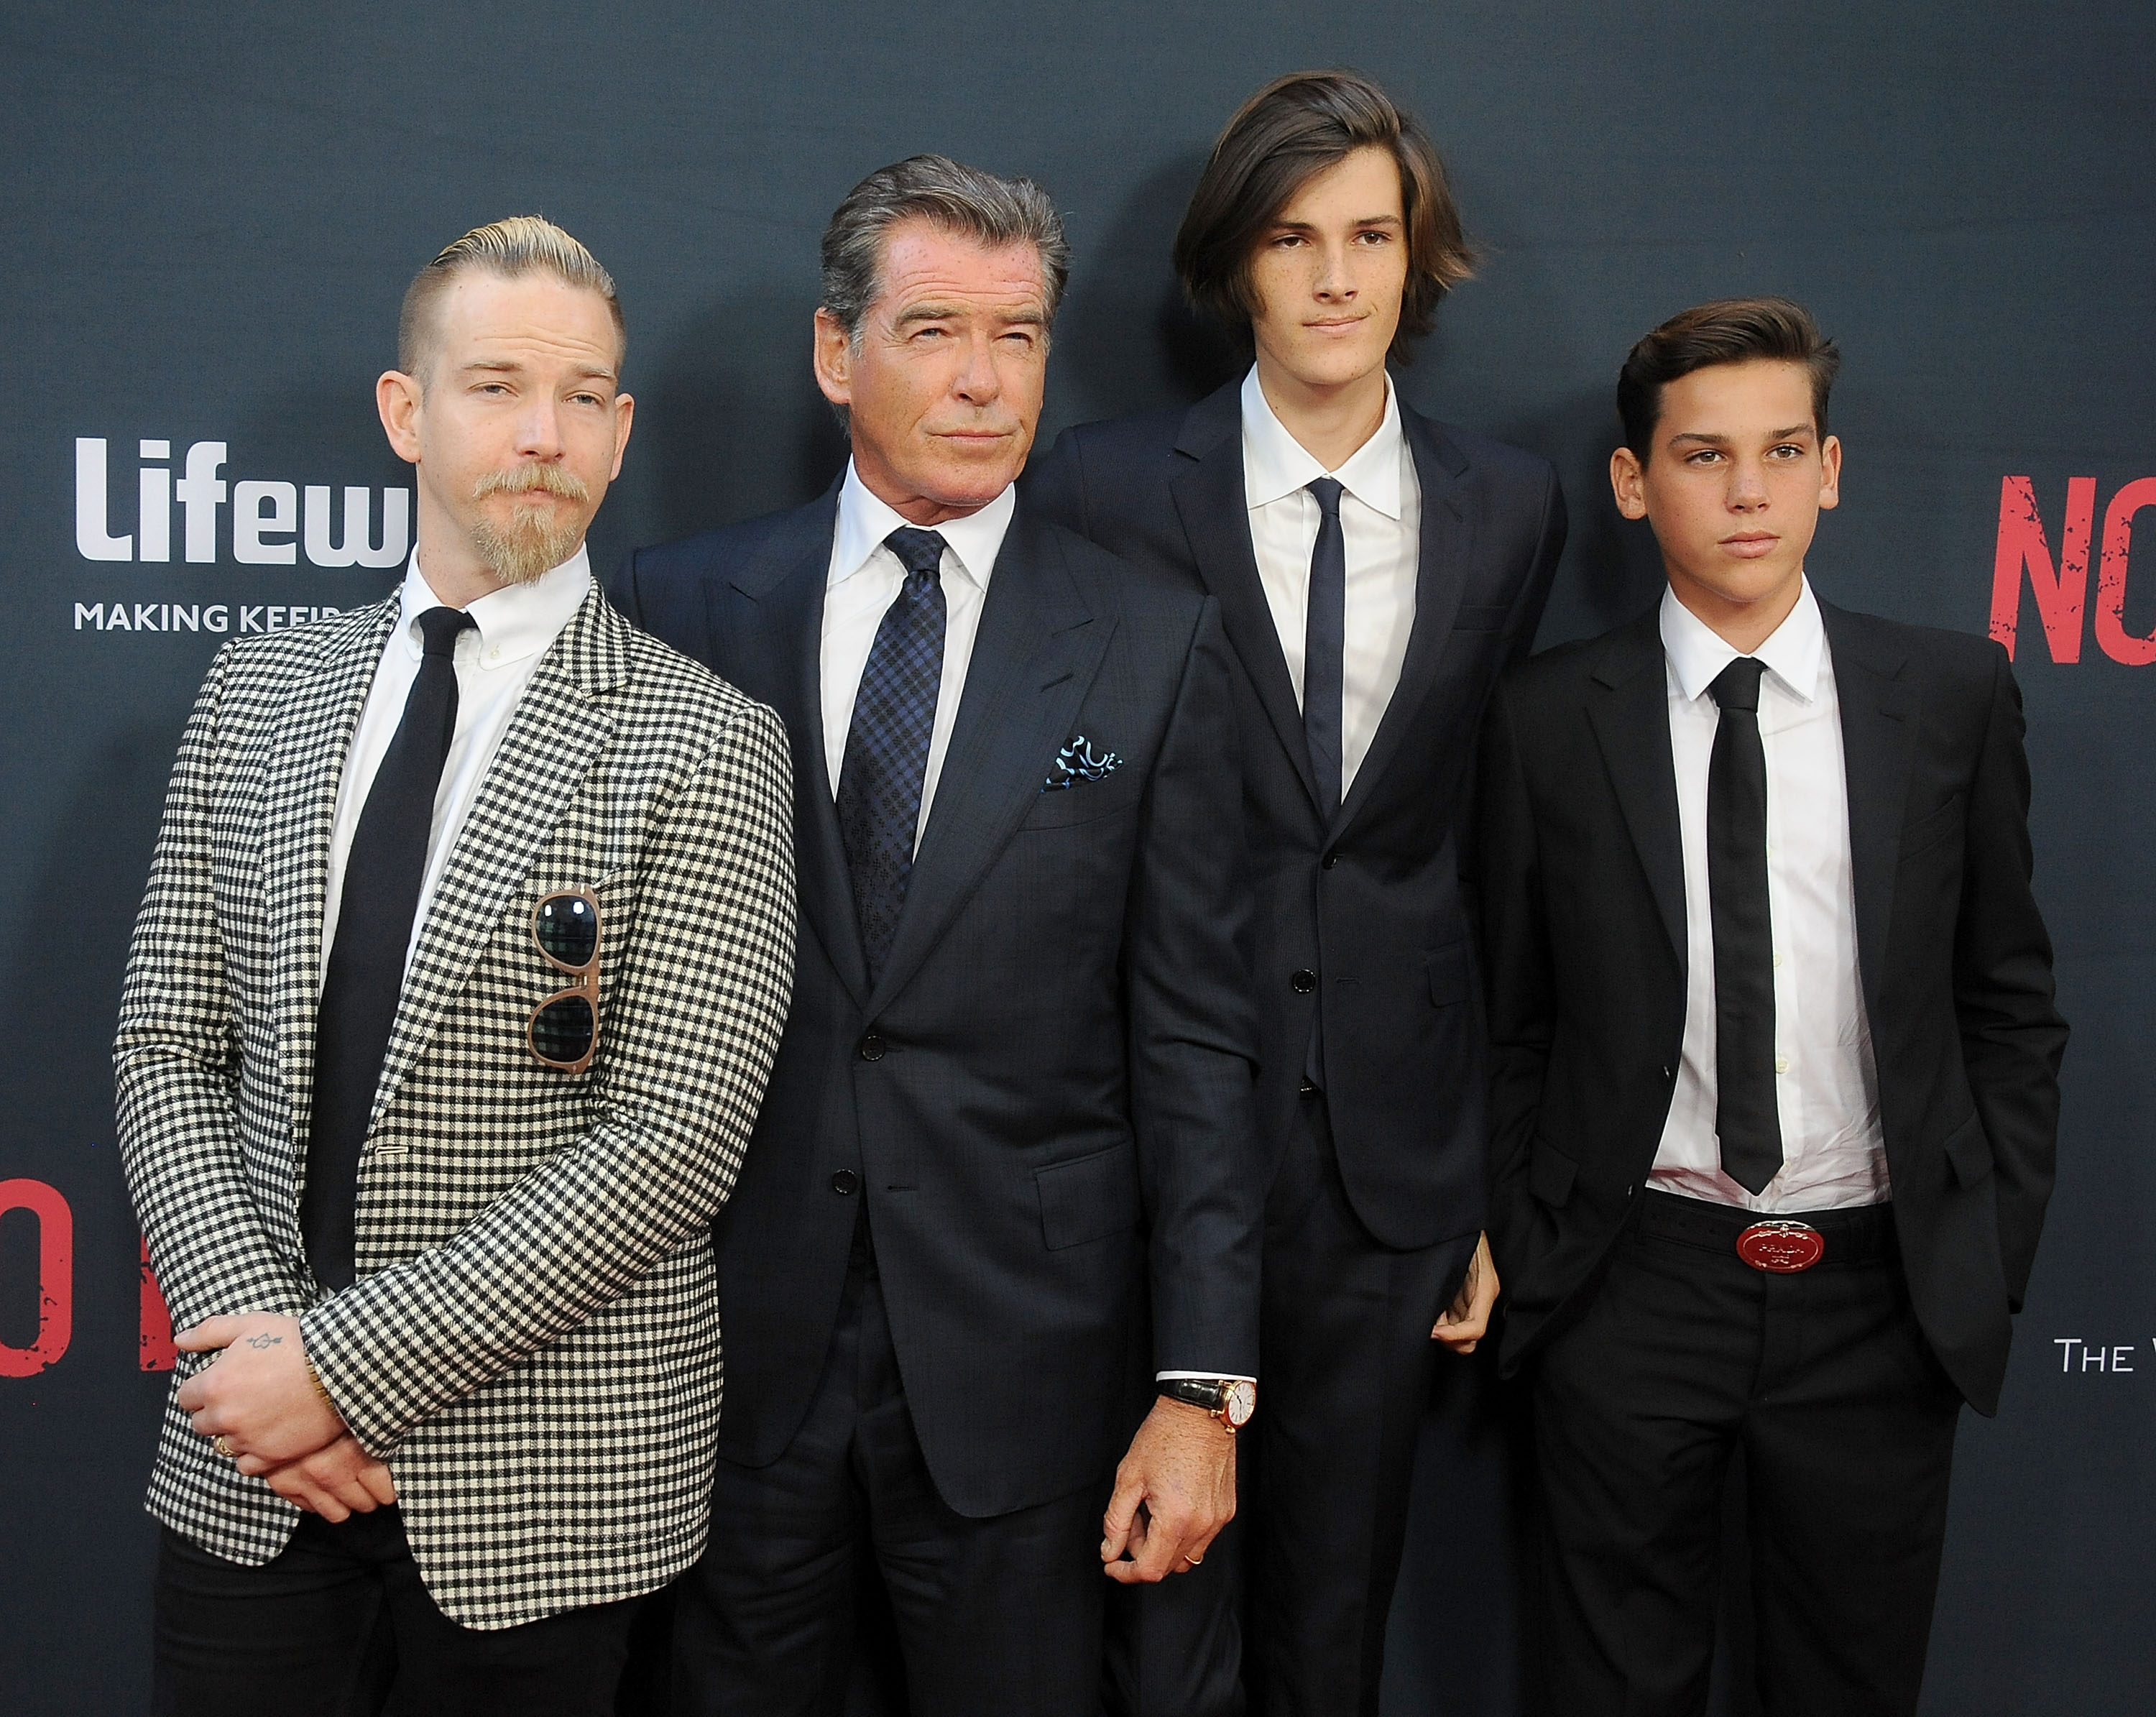 Pierce Brosnan pictured with his sons Sean, Dylan, and Paris